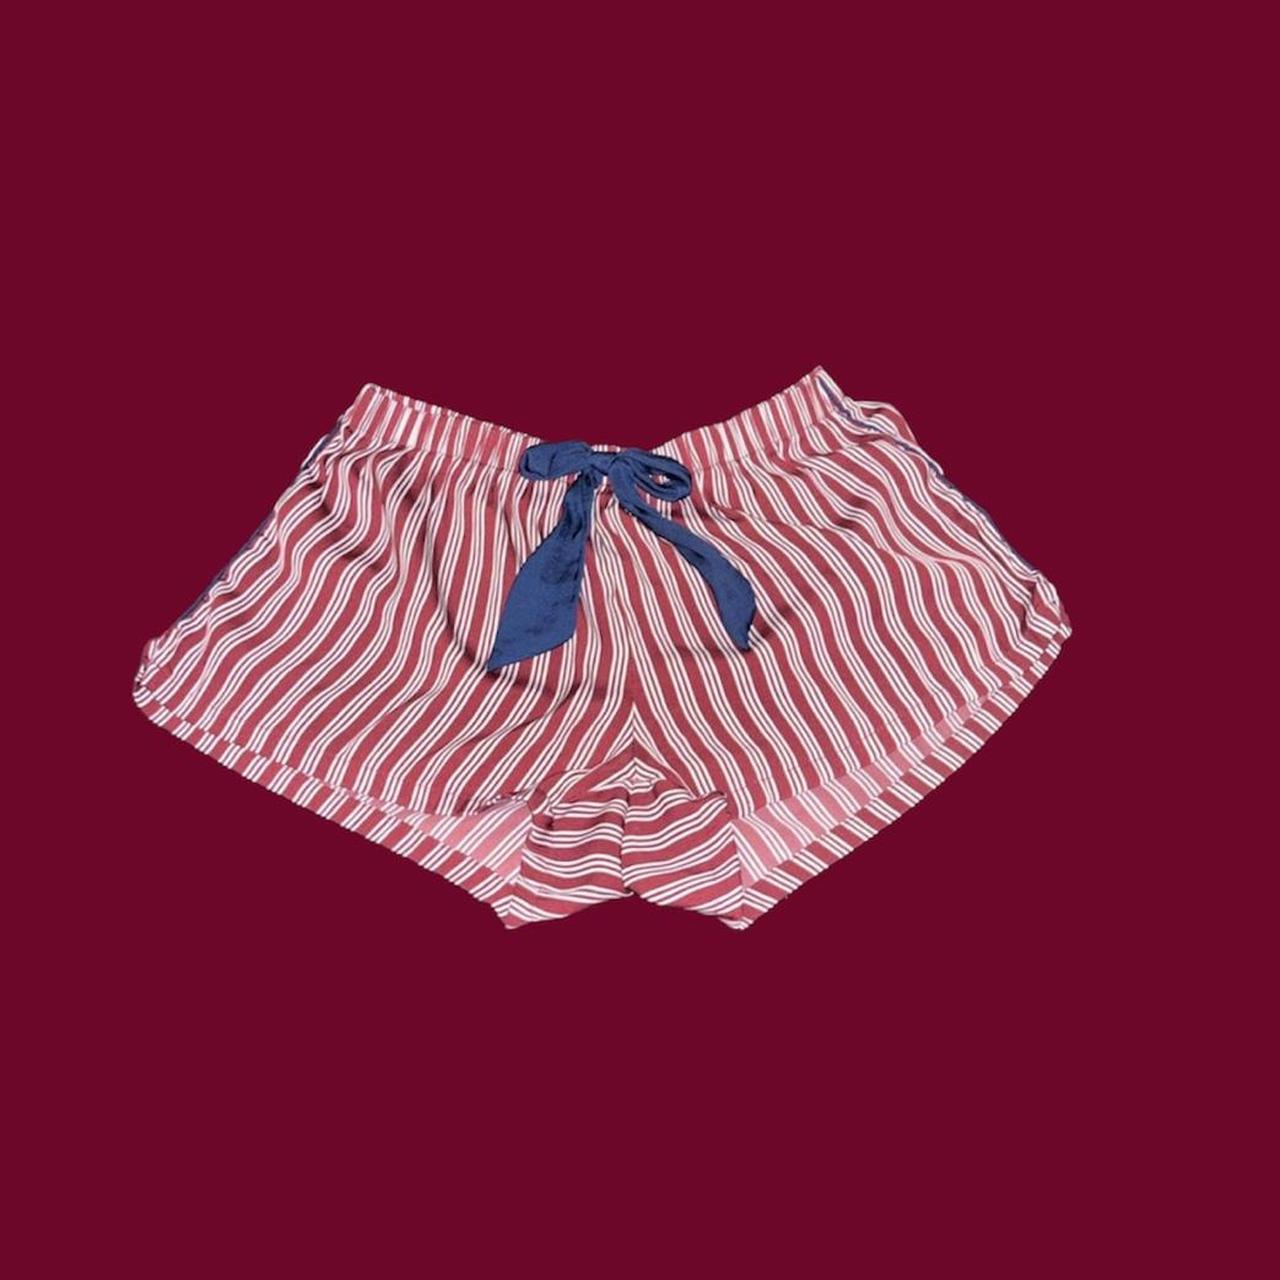 Aries Women's Burgundy and Blue Shorts